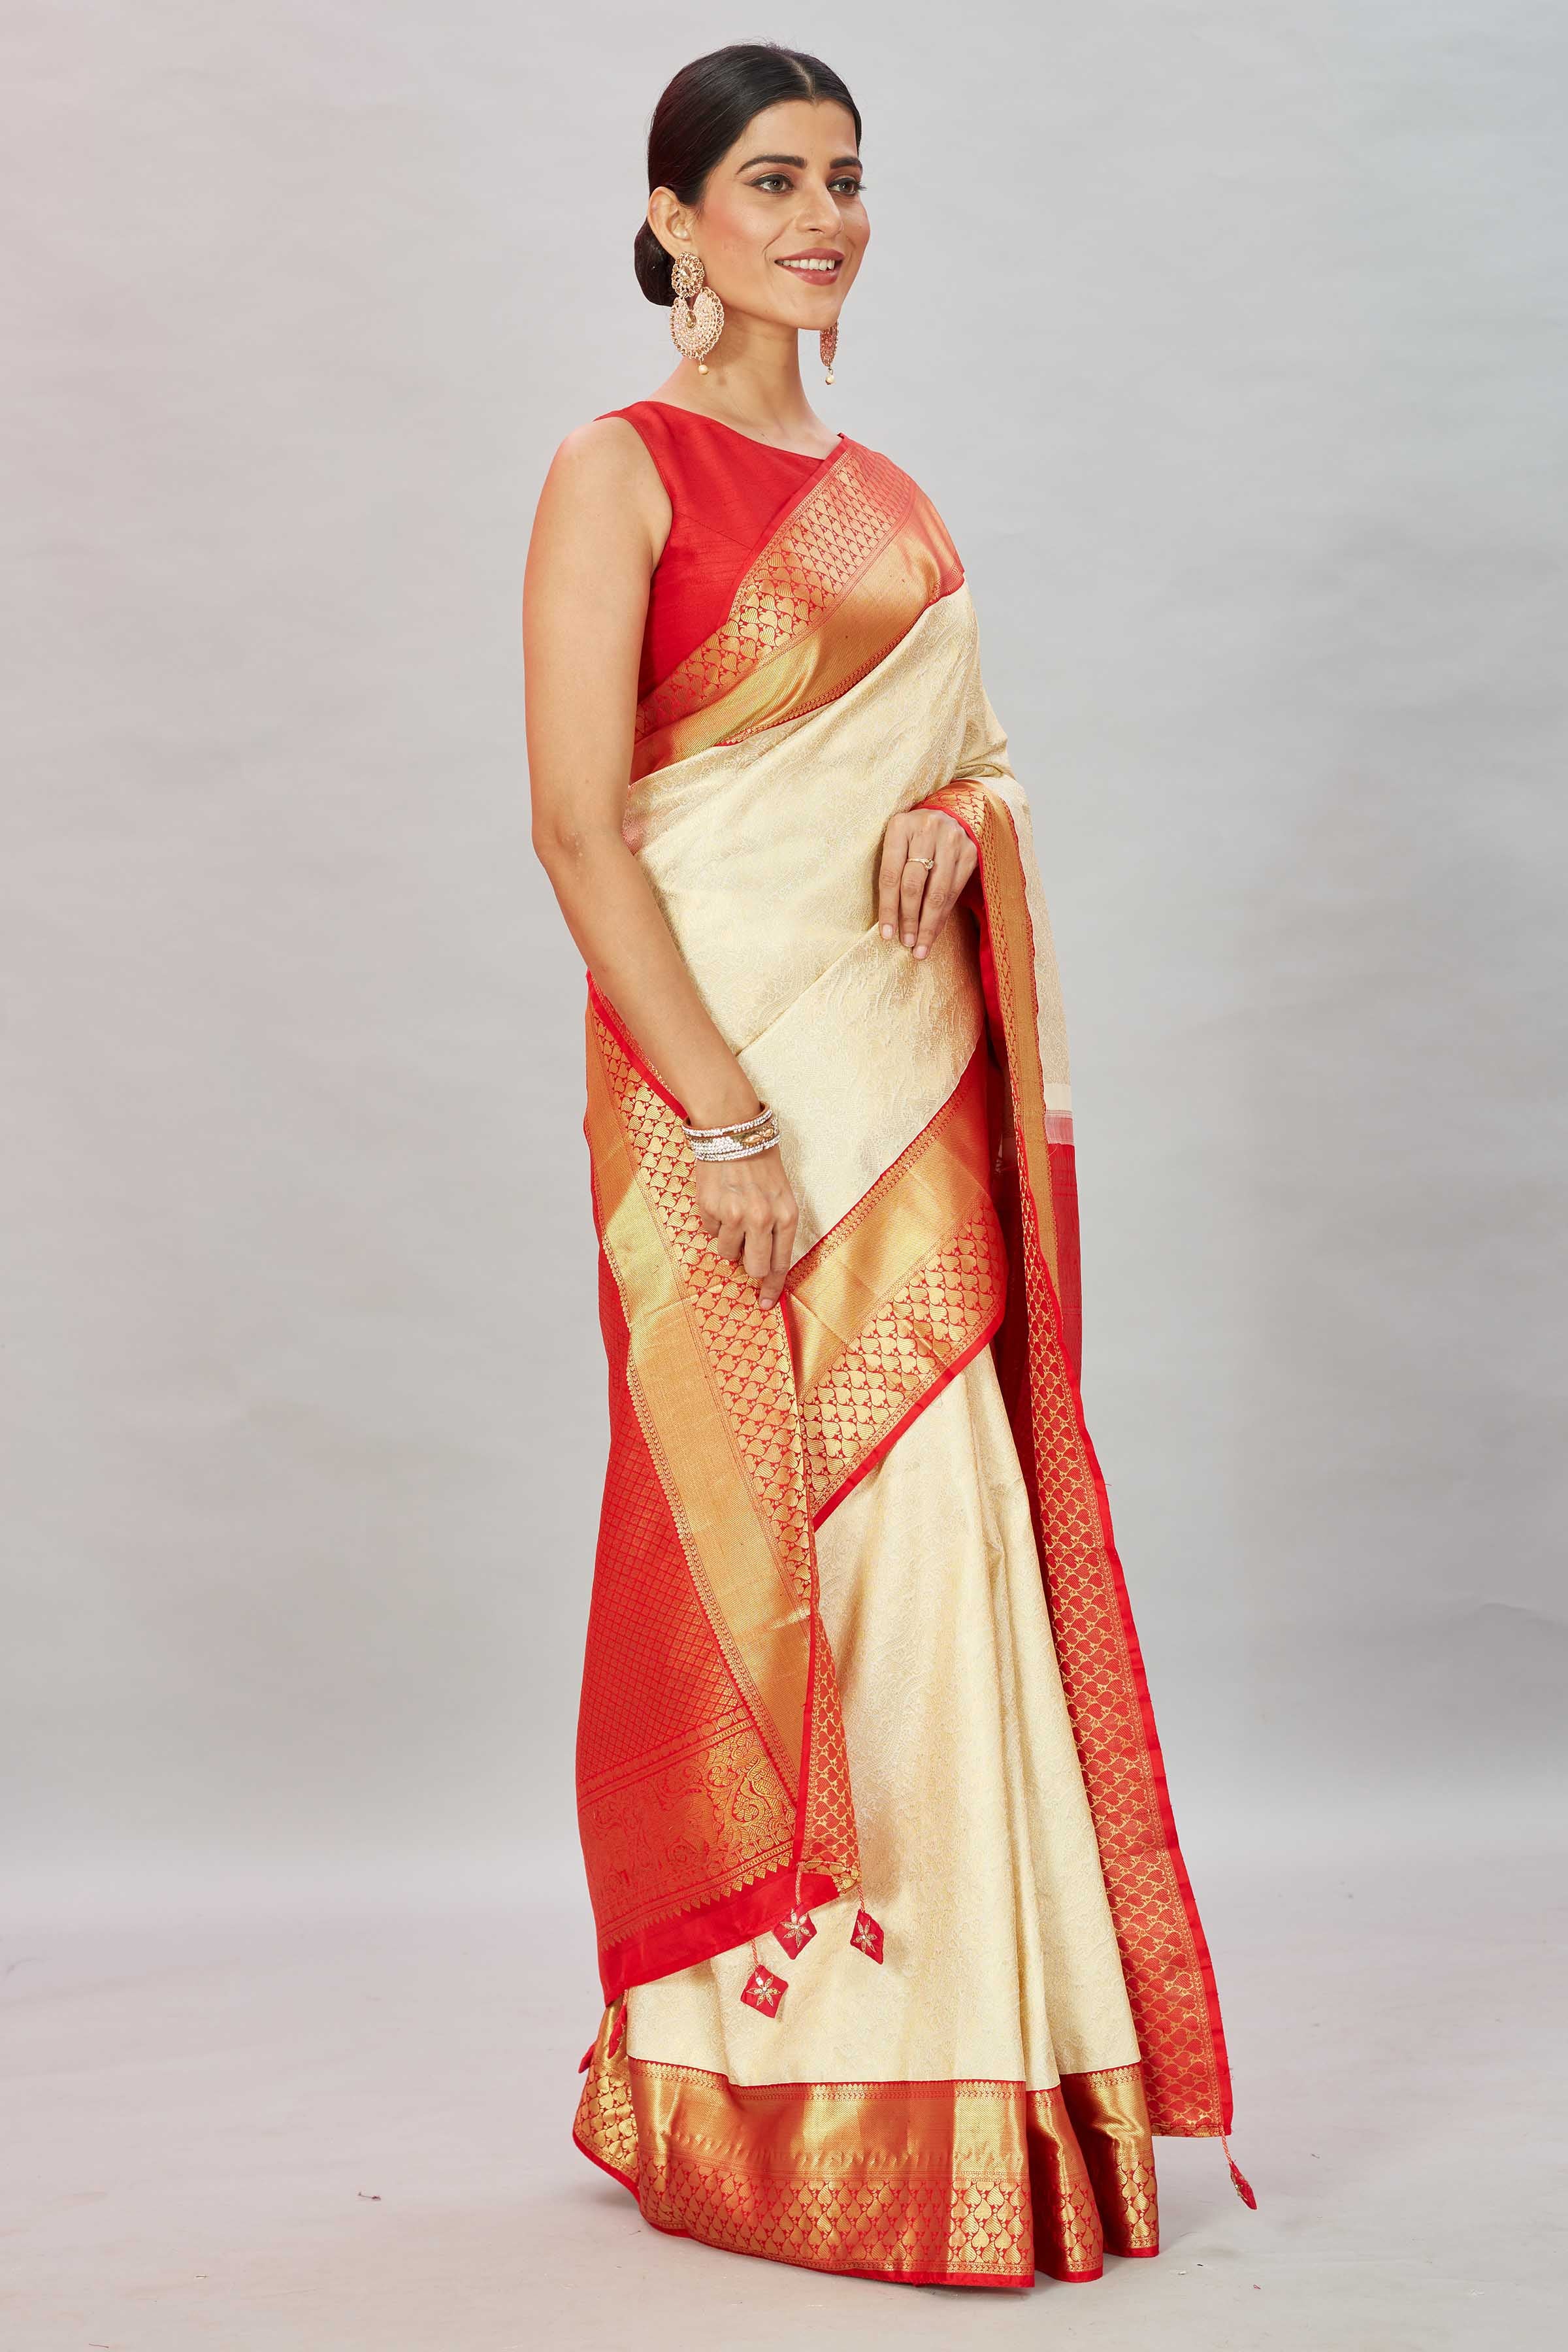 Shop cream Kanjivaram silk saree online in USA with red zari border. Look your best on festive occasions in latest designer sarees, pure silk sarees, Kanjivaram silk saris, handwoven saris, tussar silk sarees, embroidered saris from Pure Elegance Indian clothing store in USA.-side